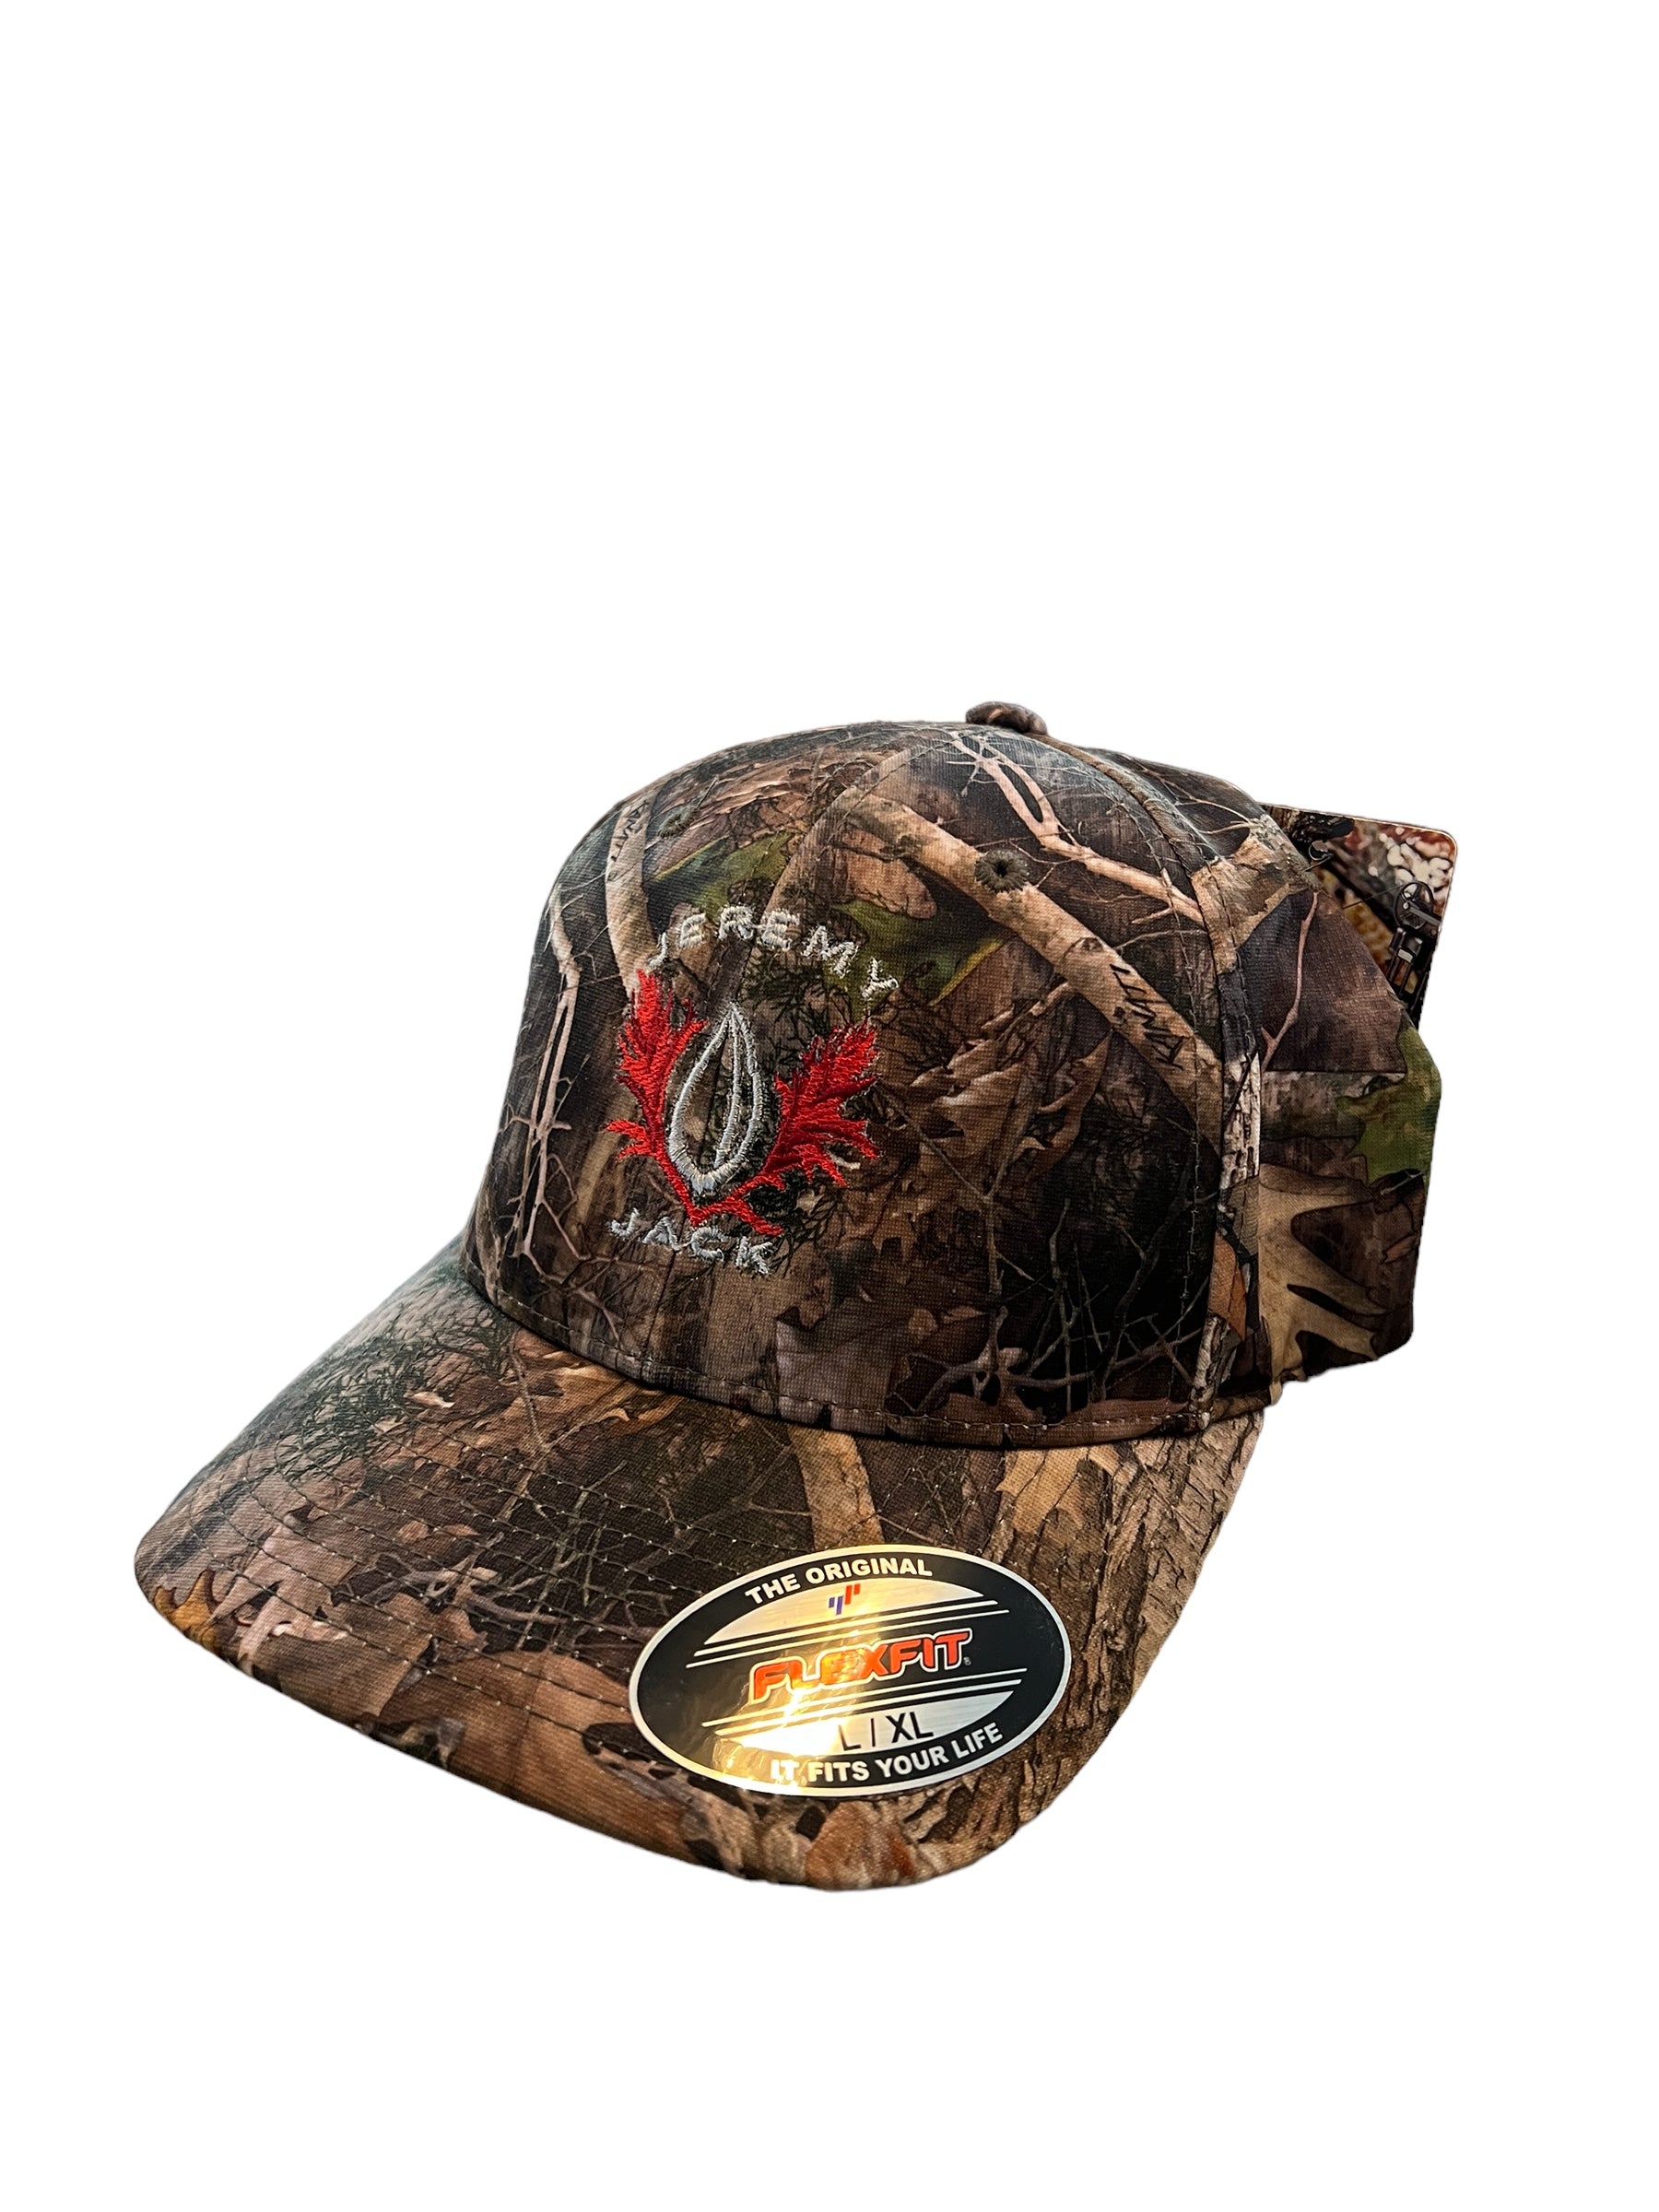 Jeremy Jack Camo Fitted Hat